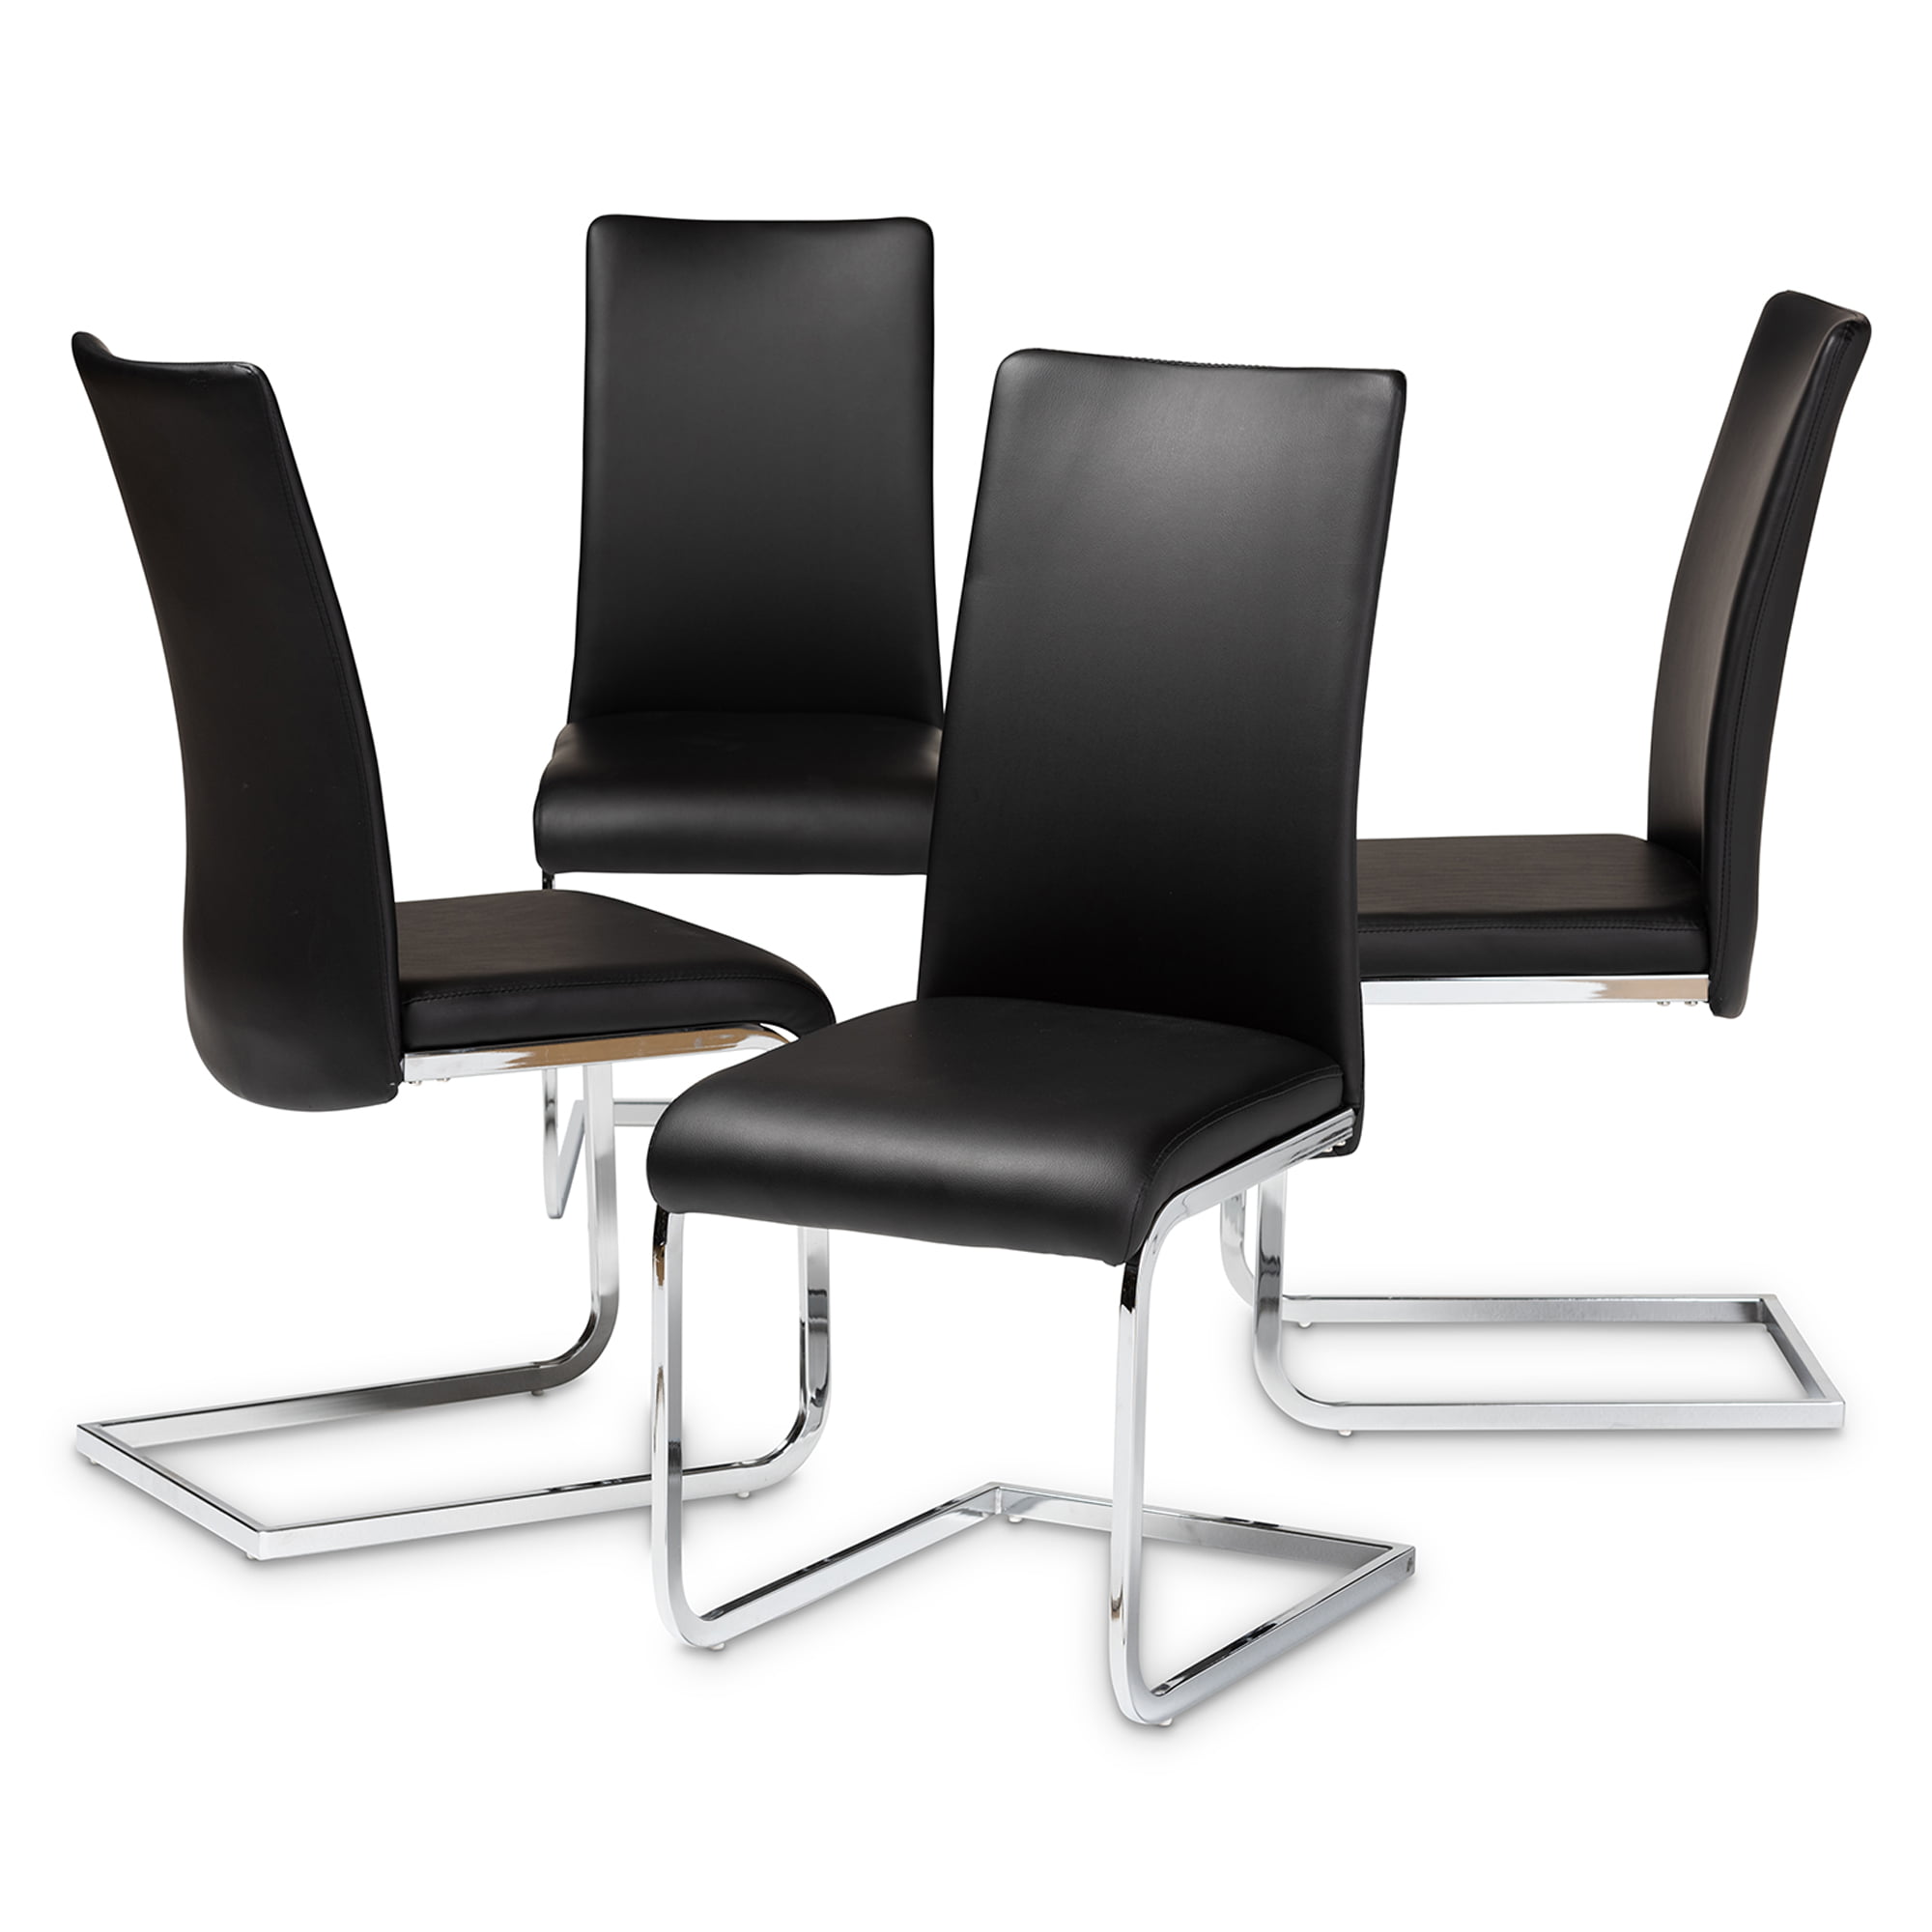 mxd white Black Vienna Chrome Frame Faux Leather Dining Kitchen Chairs